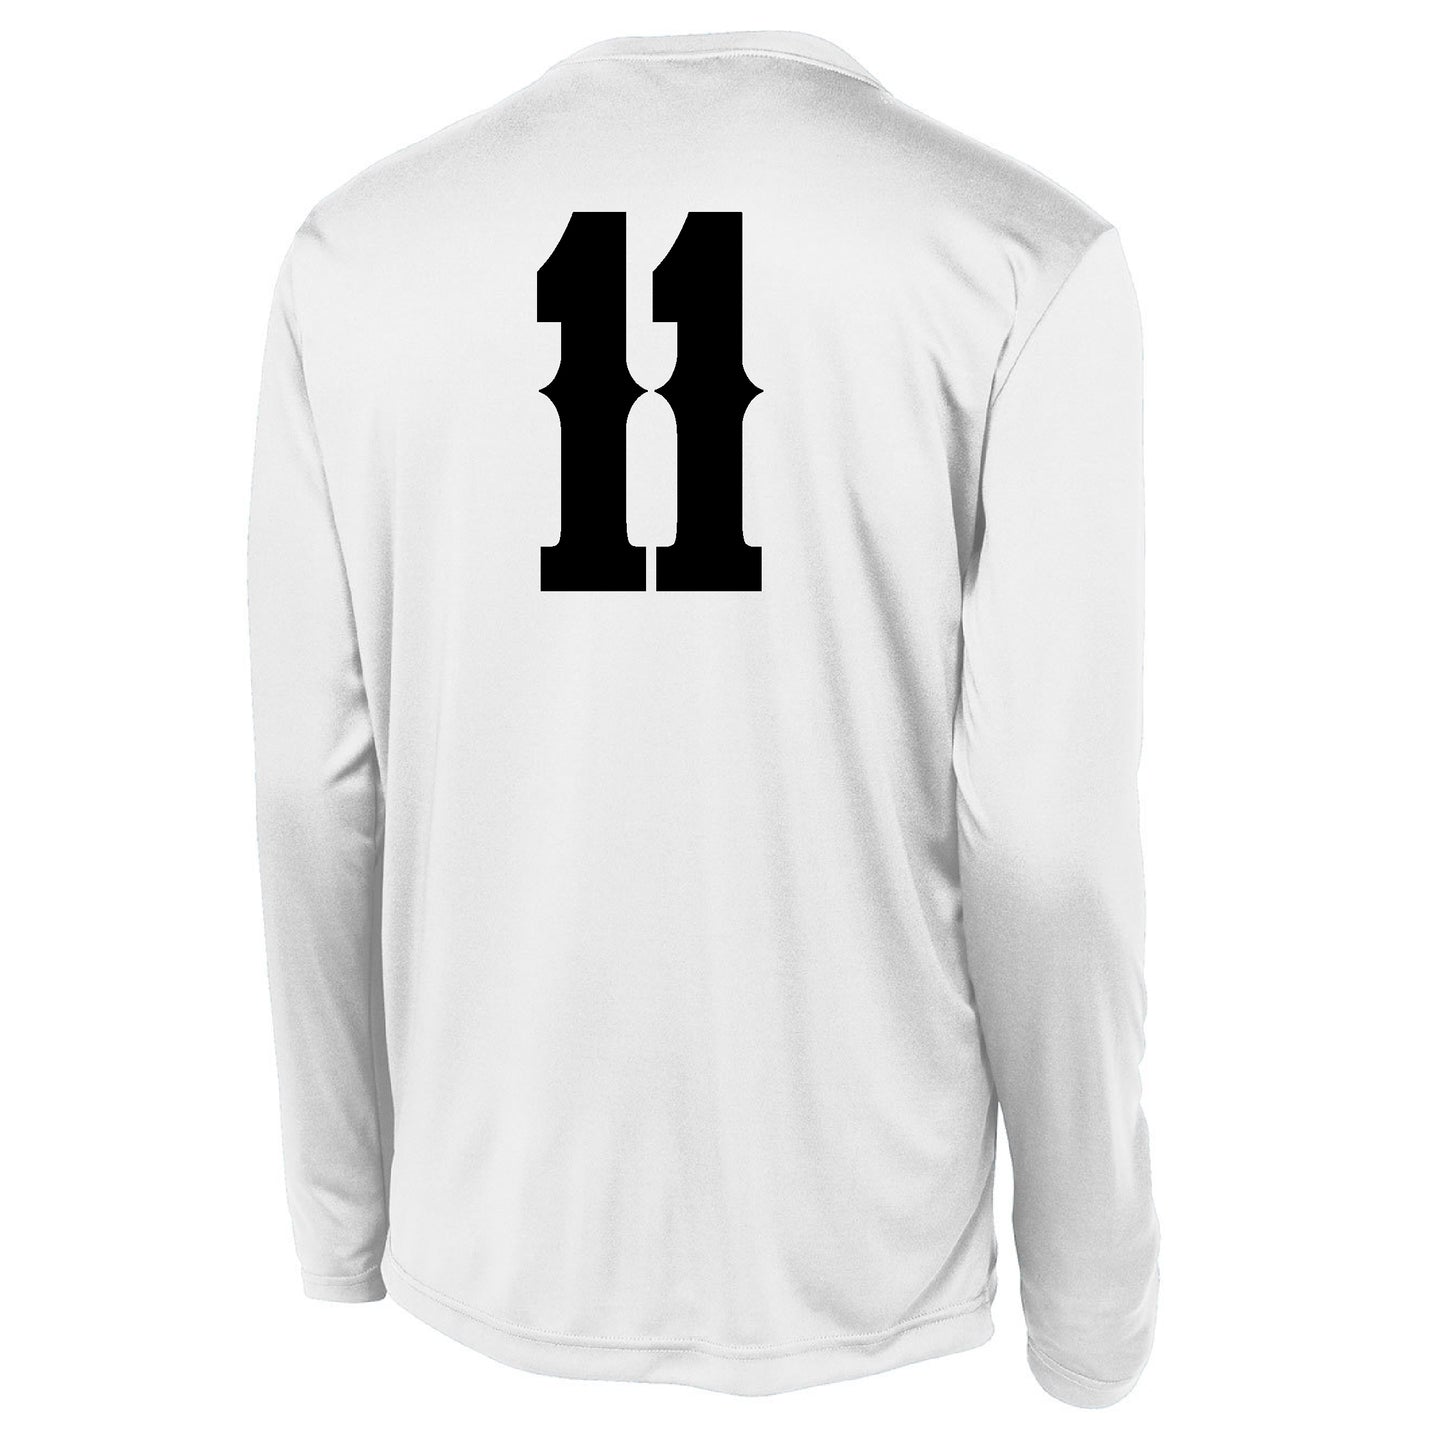 Workout Tee Long Sleeve W/ Number